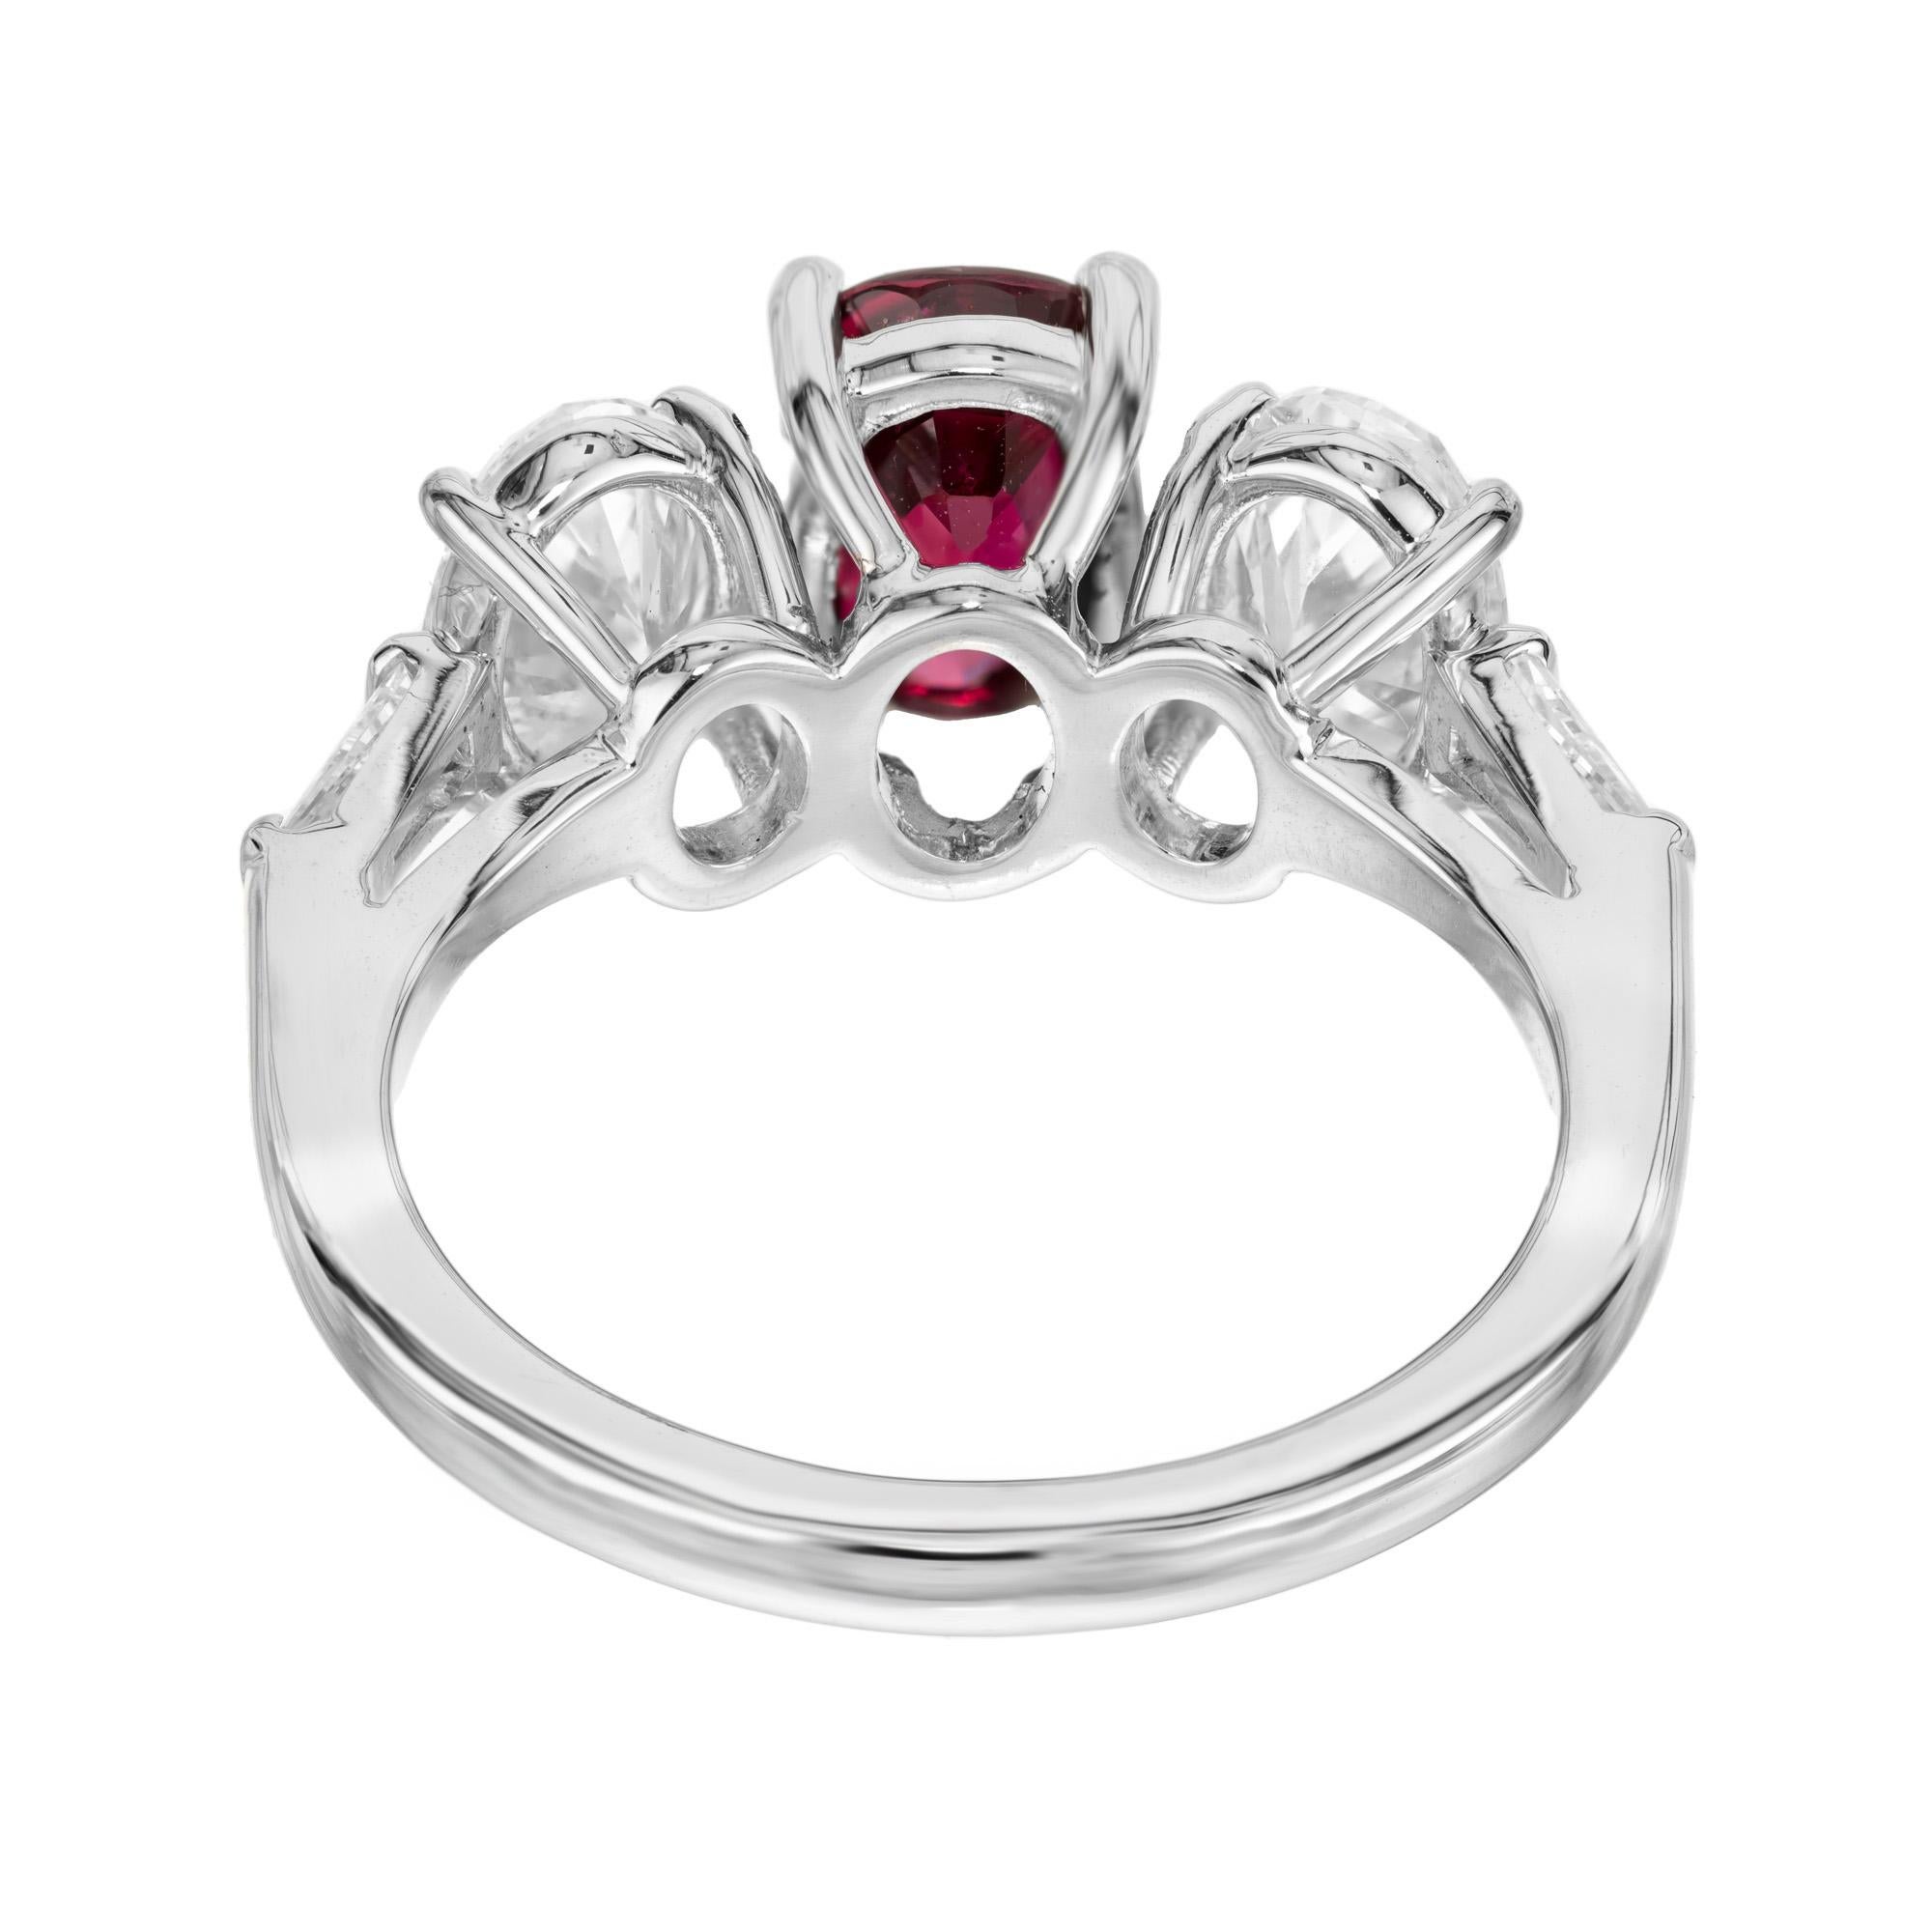 Peter Suchy GIA Certified 2.02 Carat Oval Ruby Diamond Three-Stone Platinum Ring For Sale 3